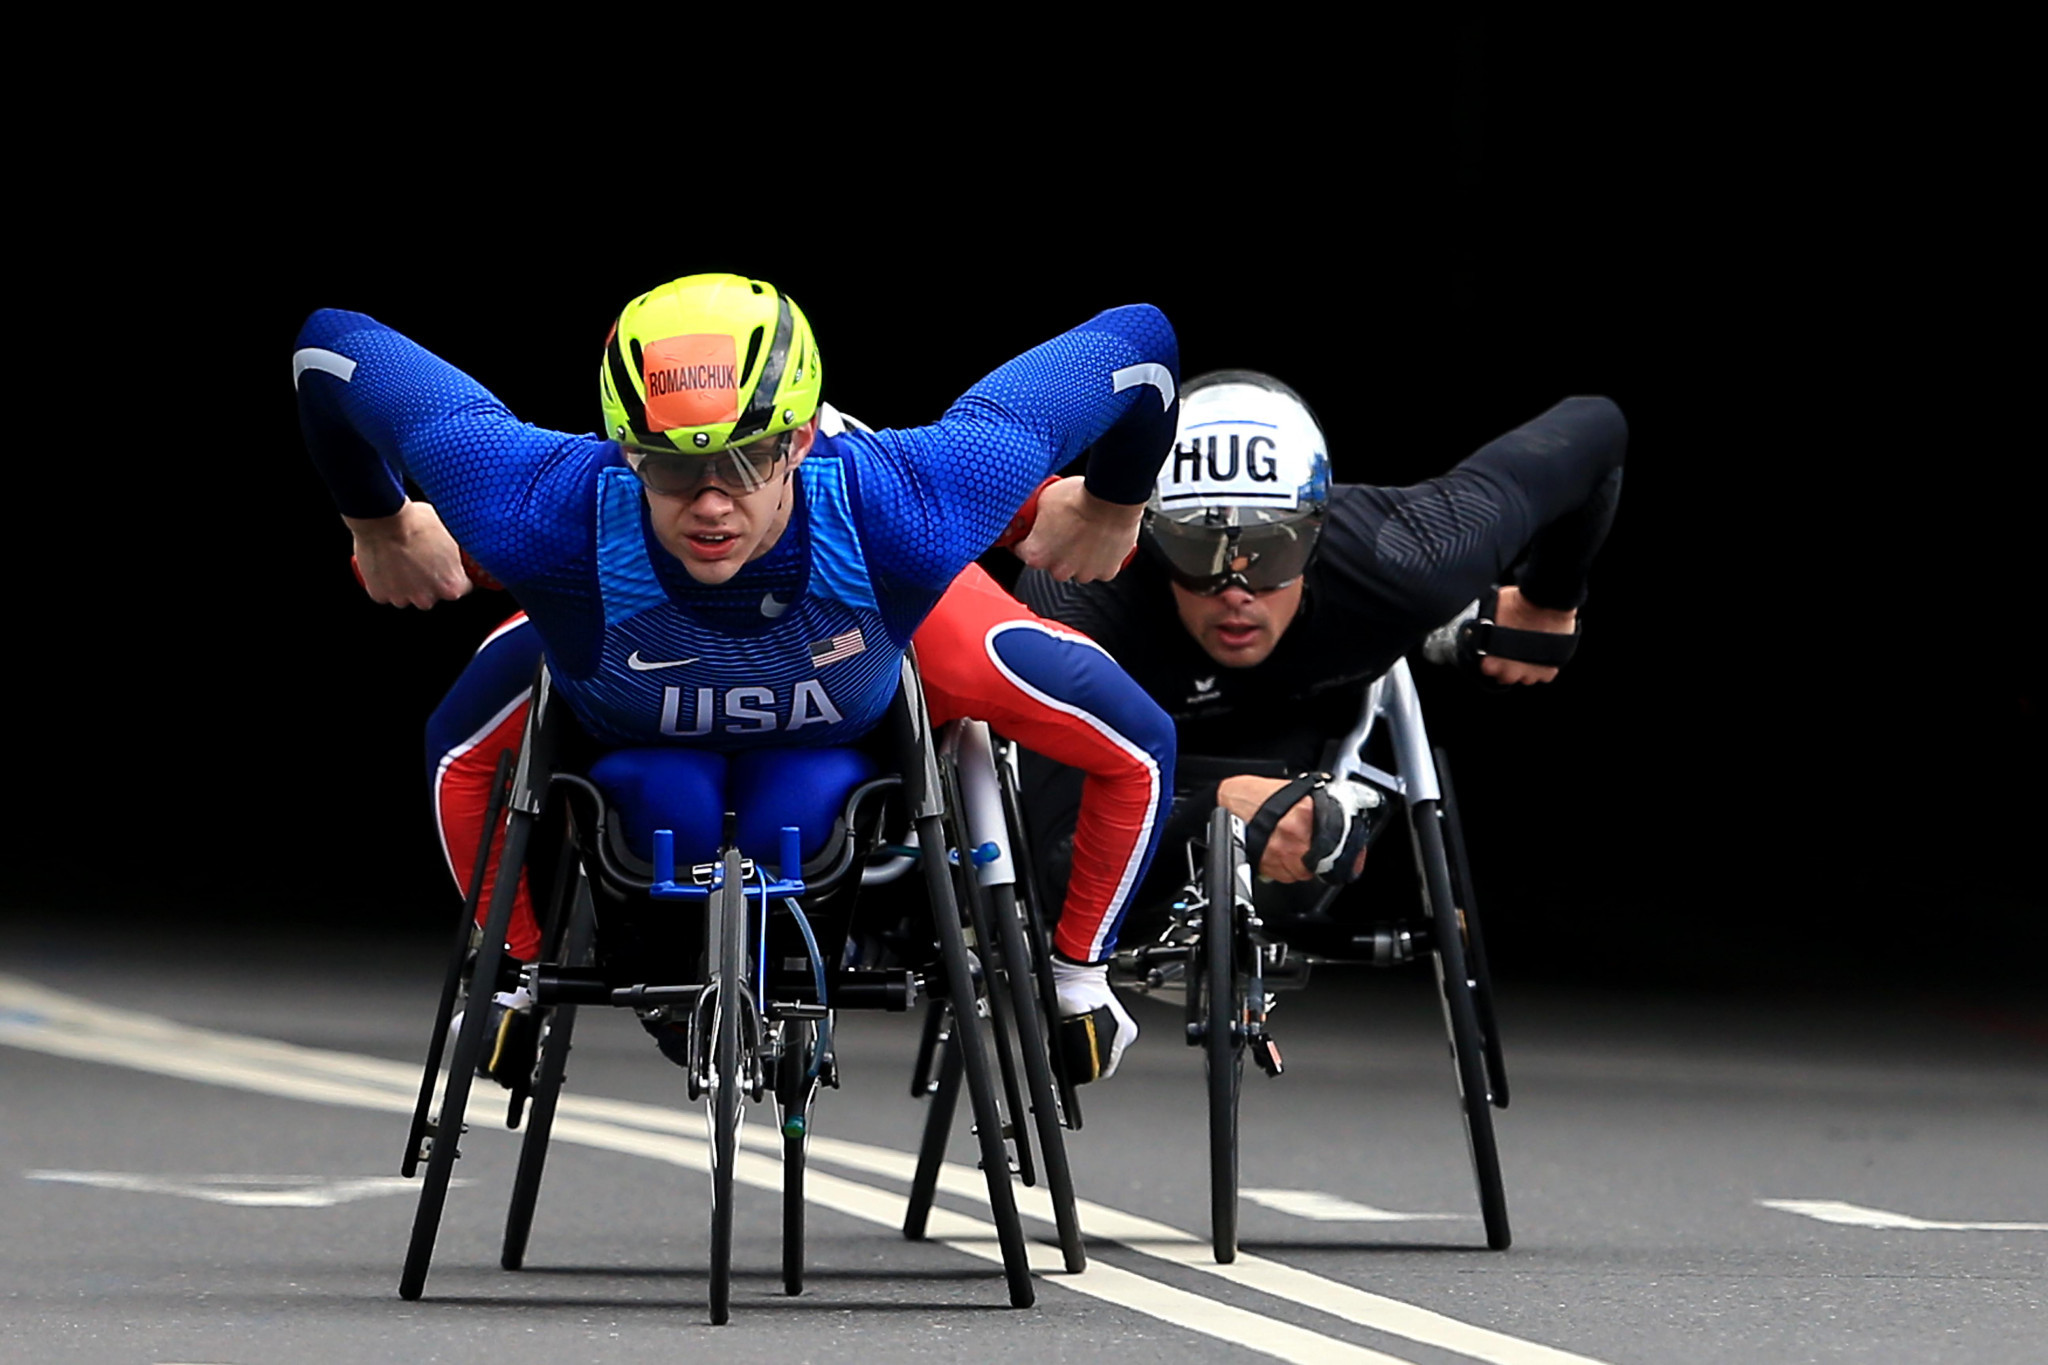 United States' Daniel Romanchuk won the men's wheelchair race in a sprint finish ©Getty Images